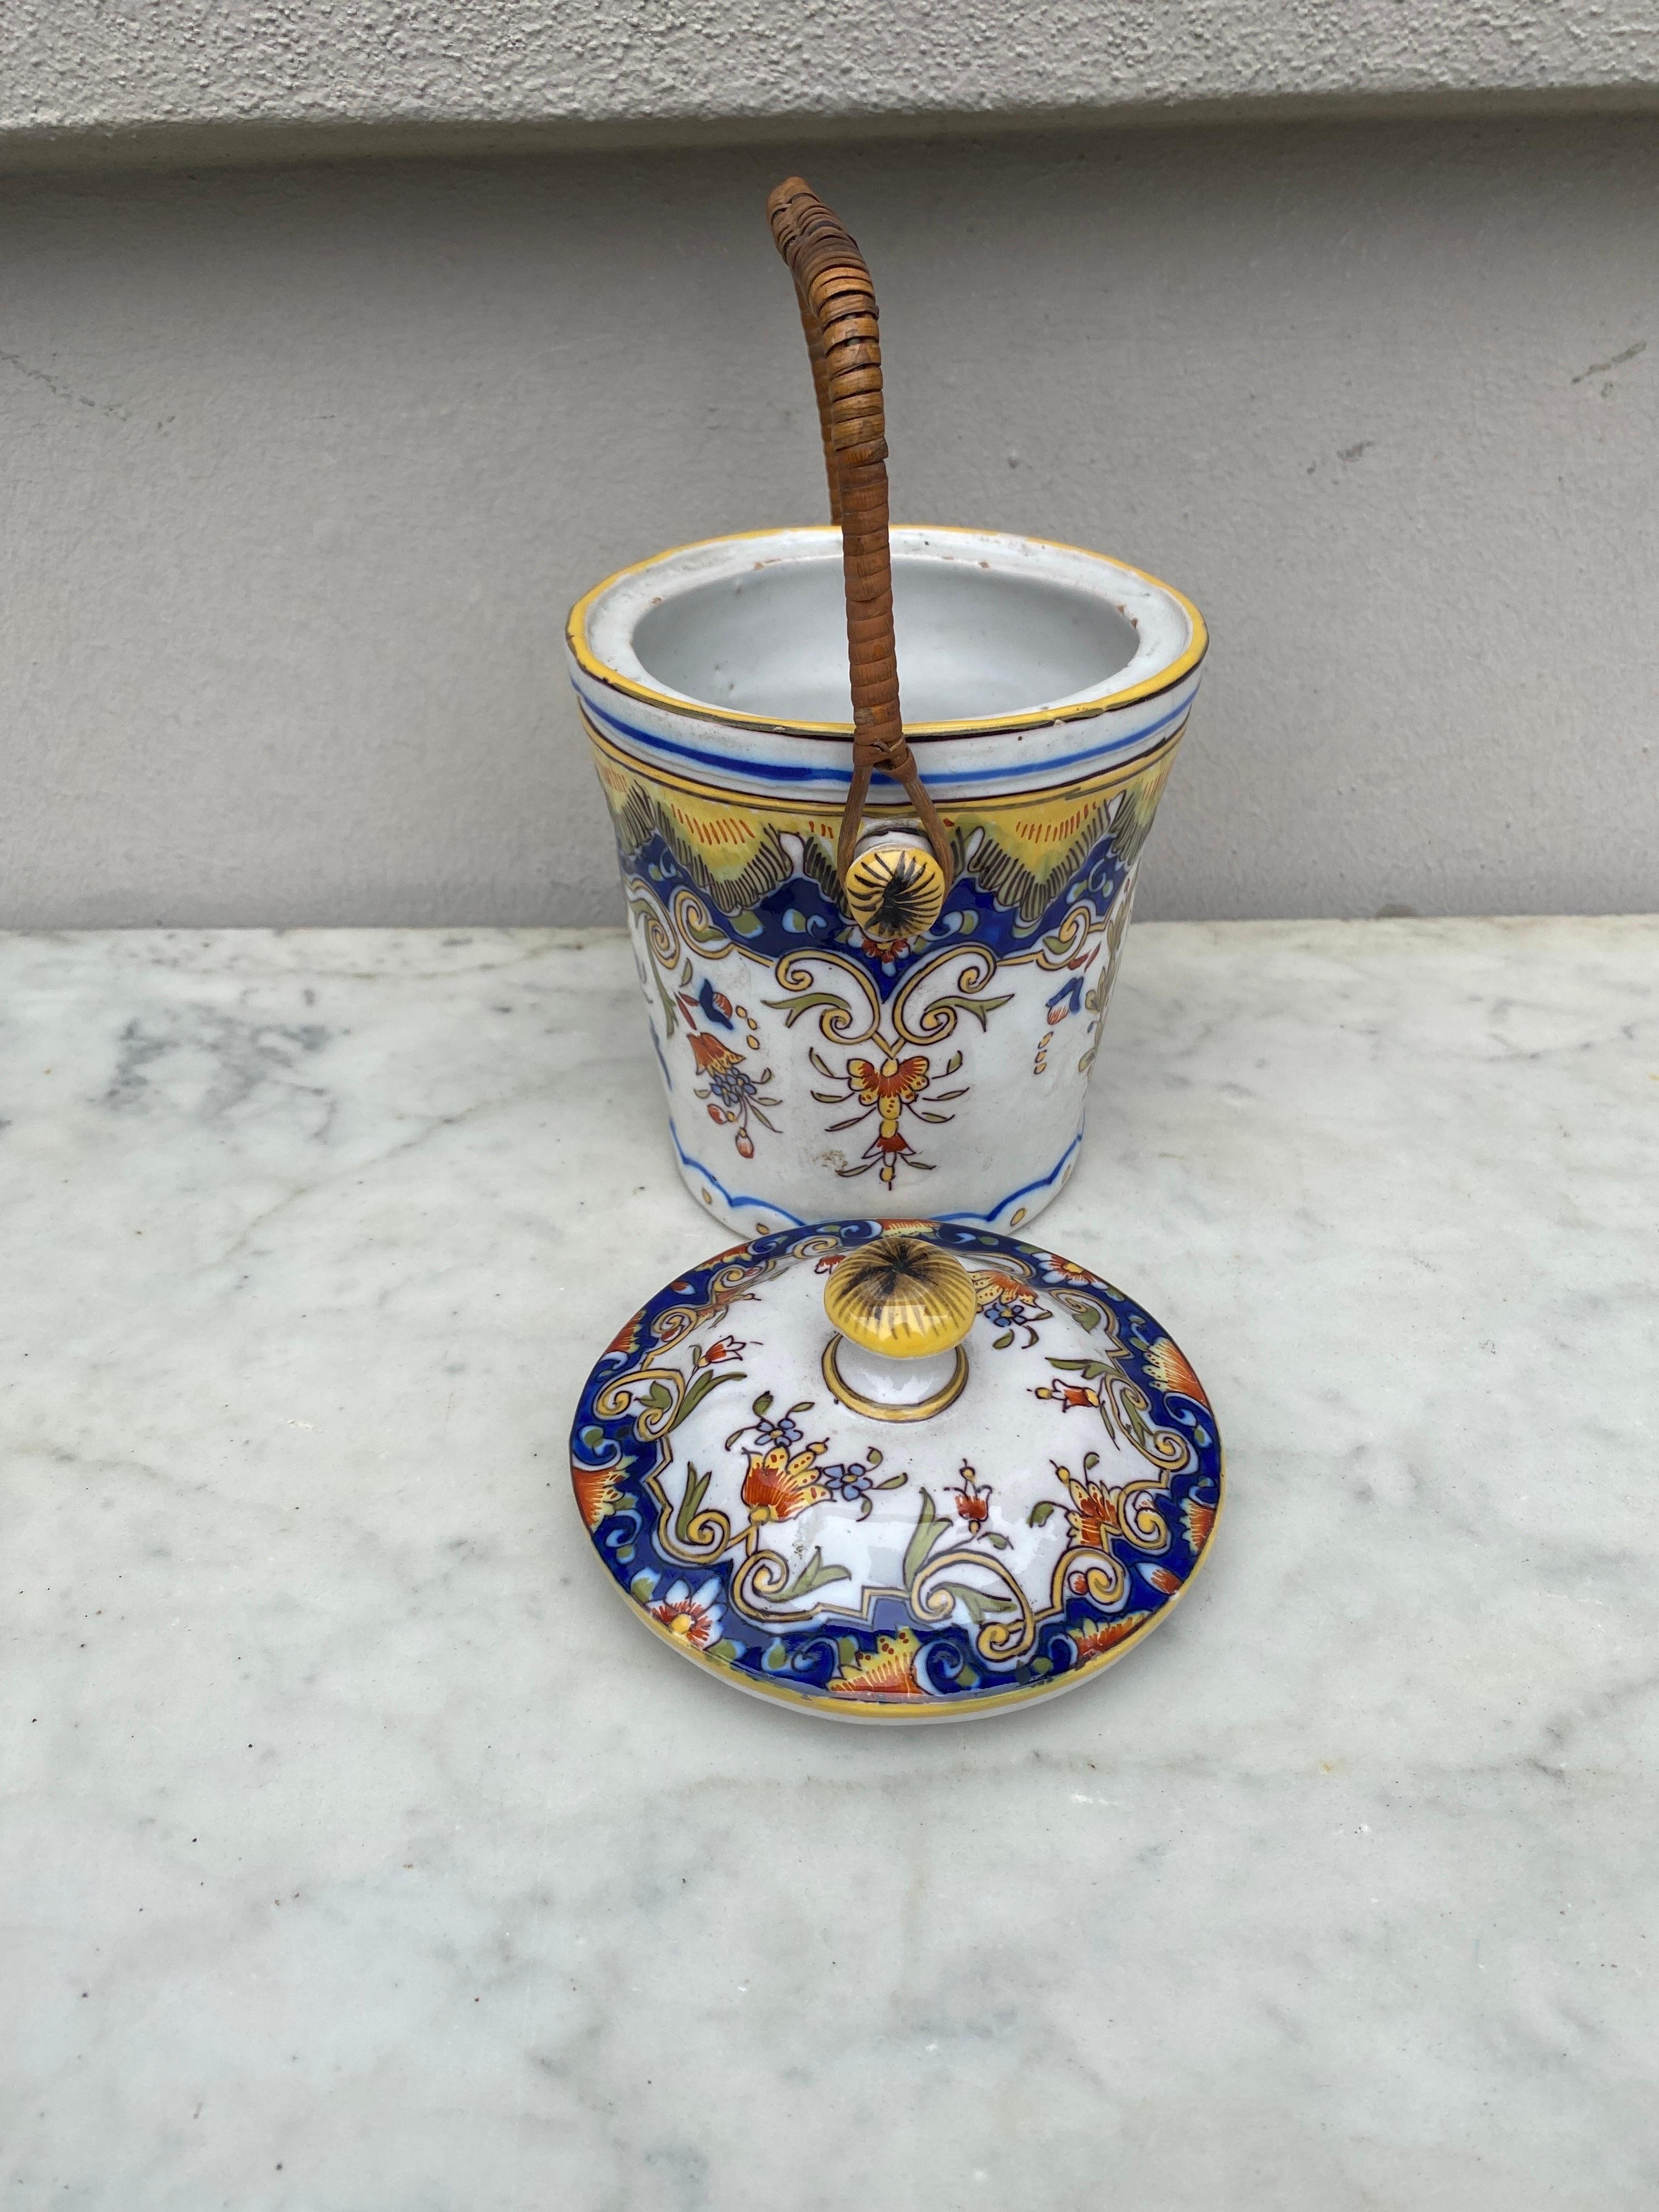 French Faience Biscuit Barrel Desvres Circa 1900.
8 inches with handle.
7 inches height.